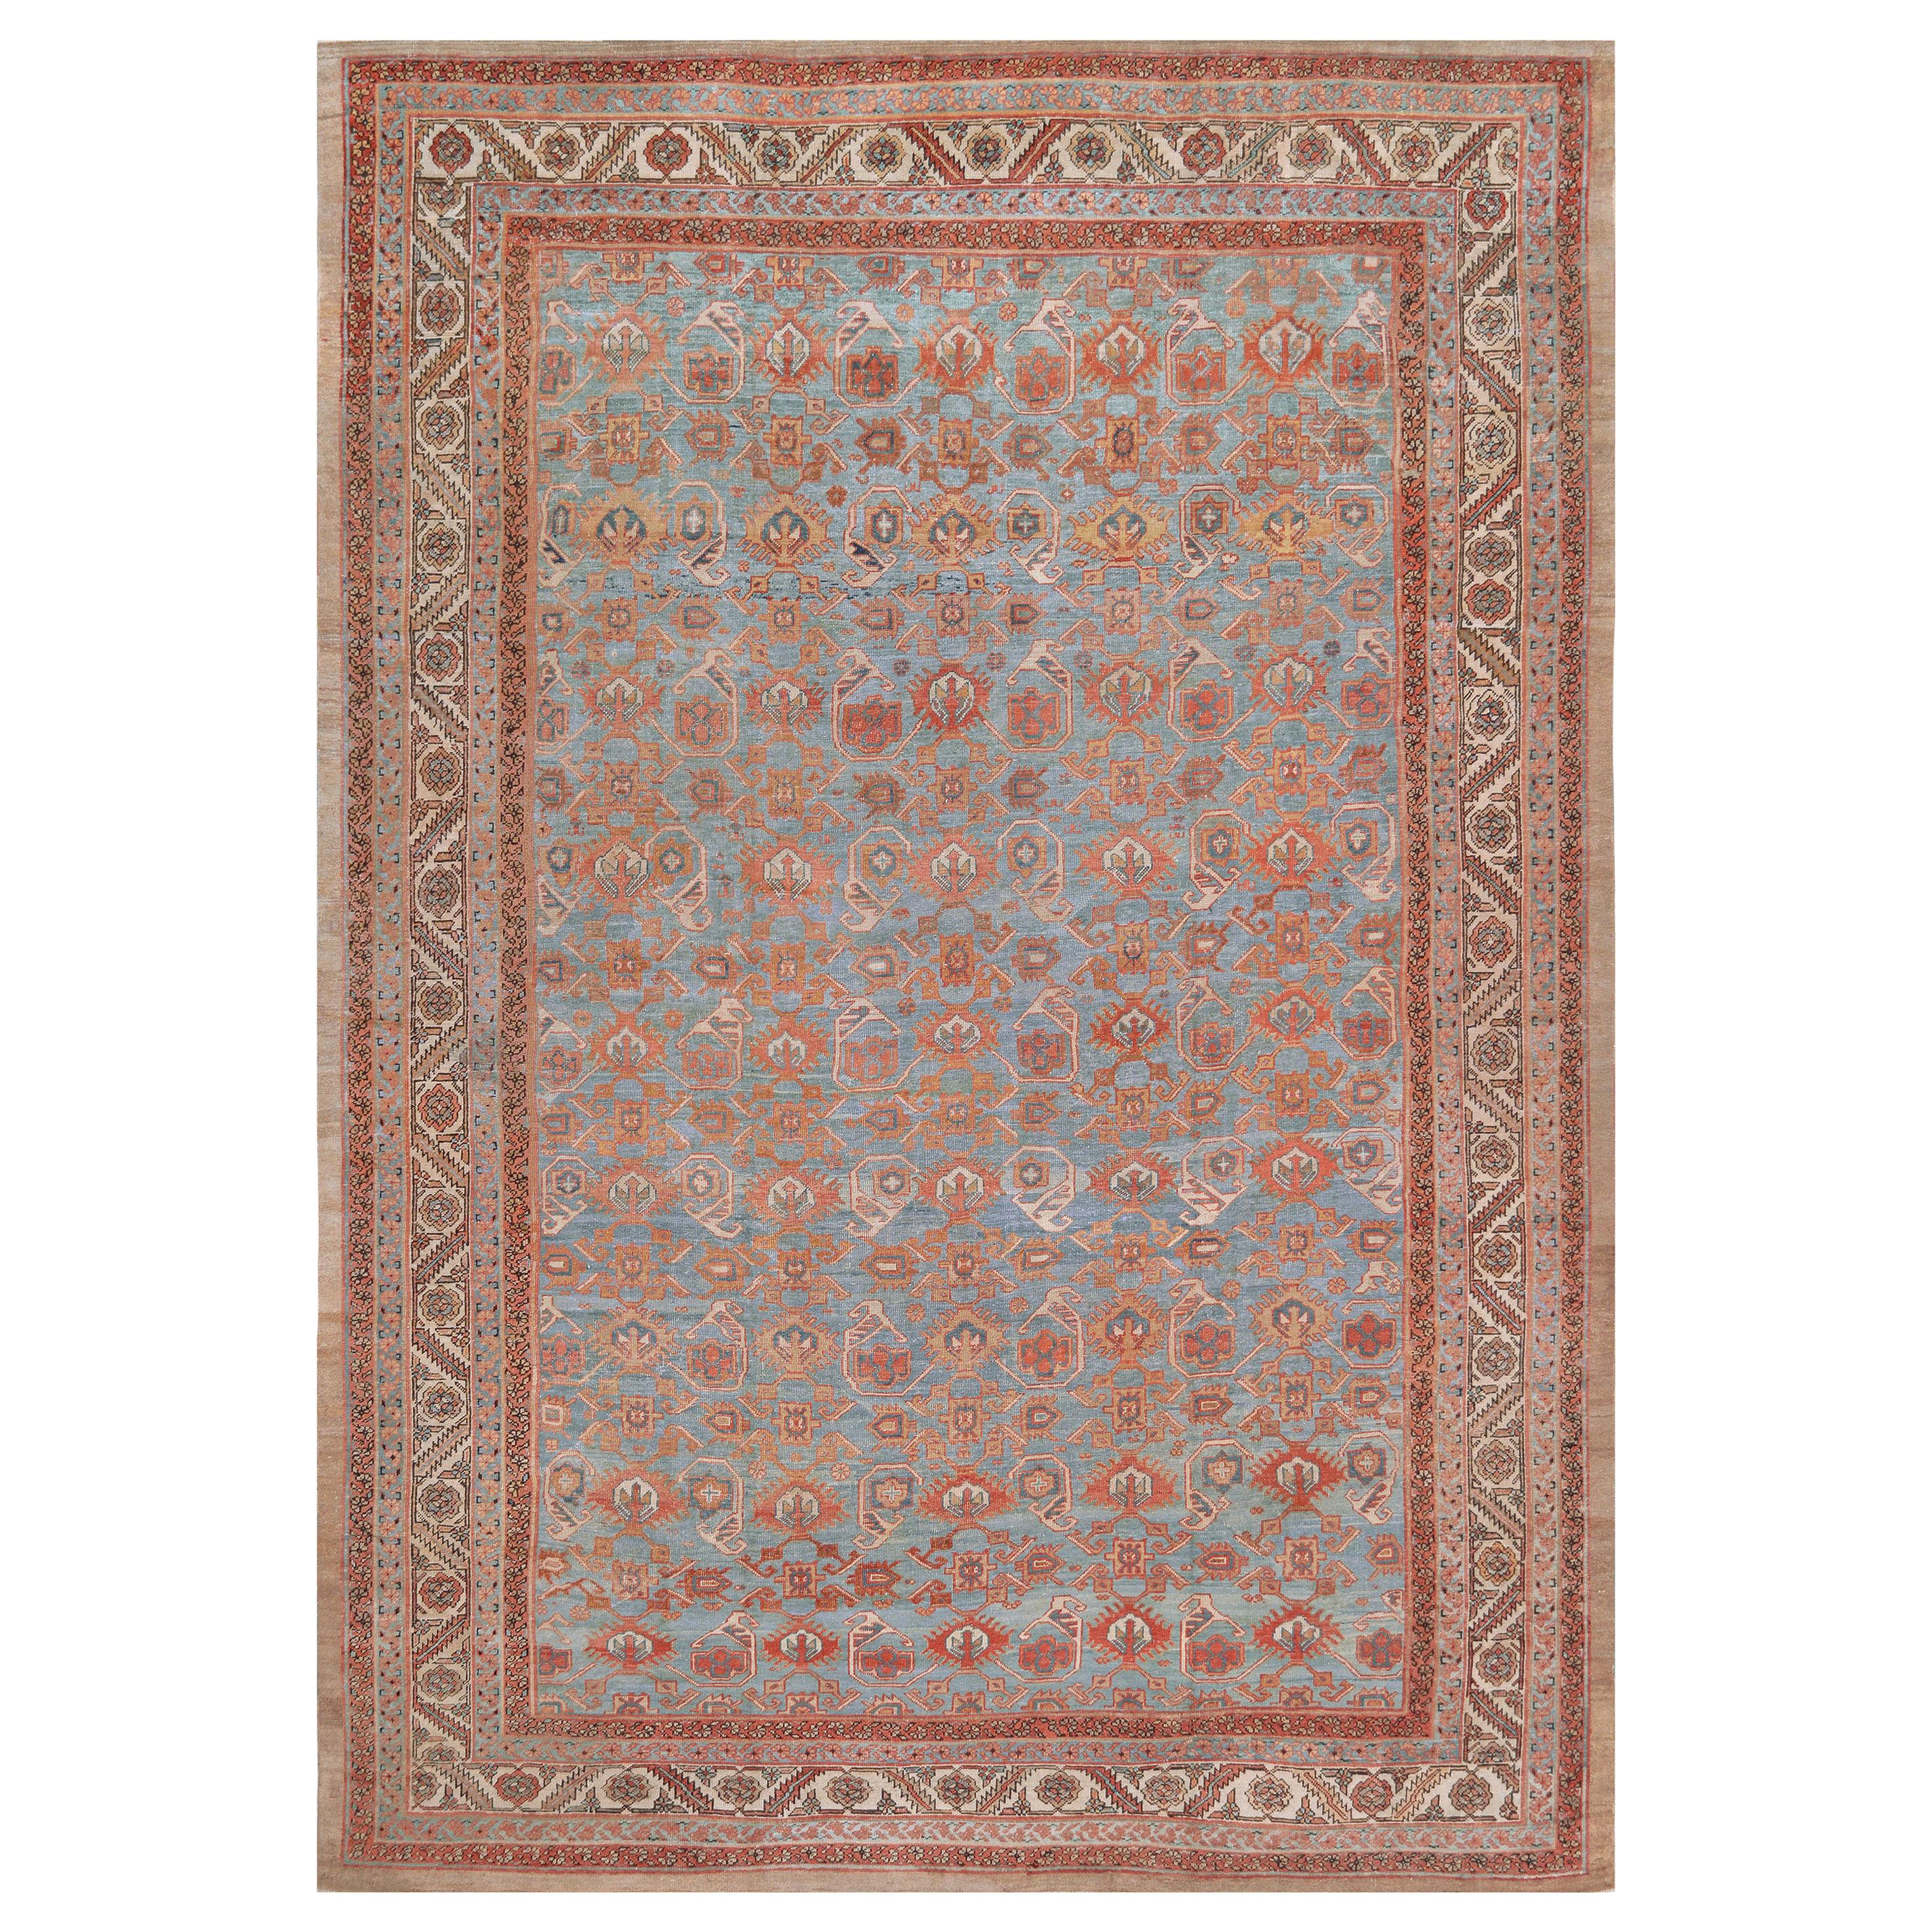 Late 19th Century Hand-Woven Bakhshaish Rug from North West Persia